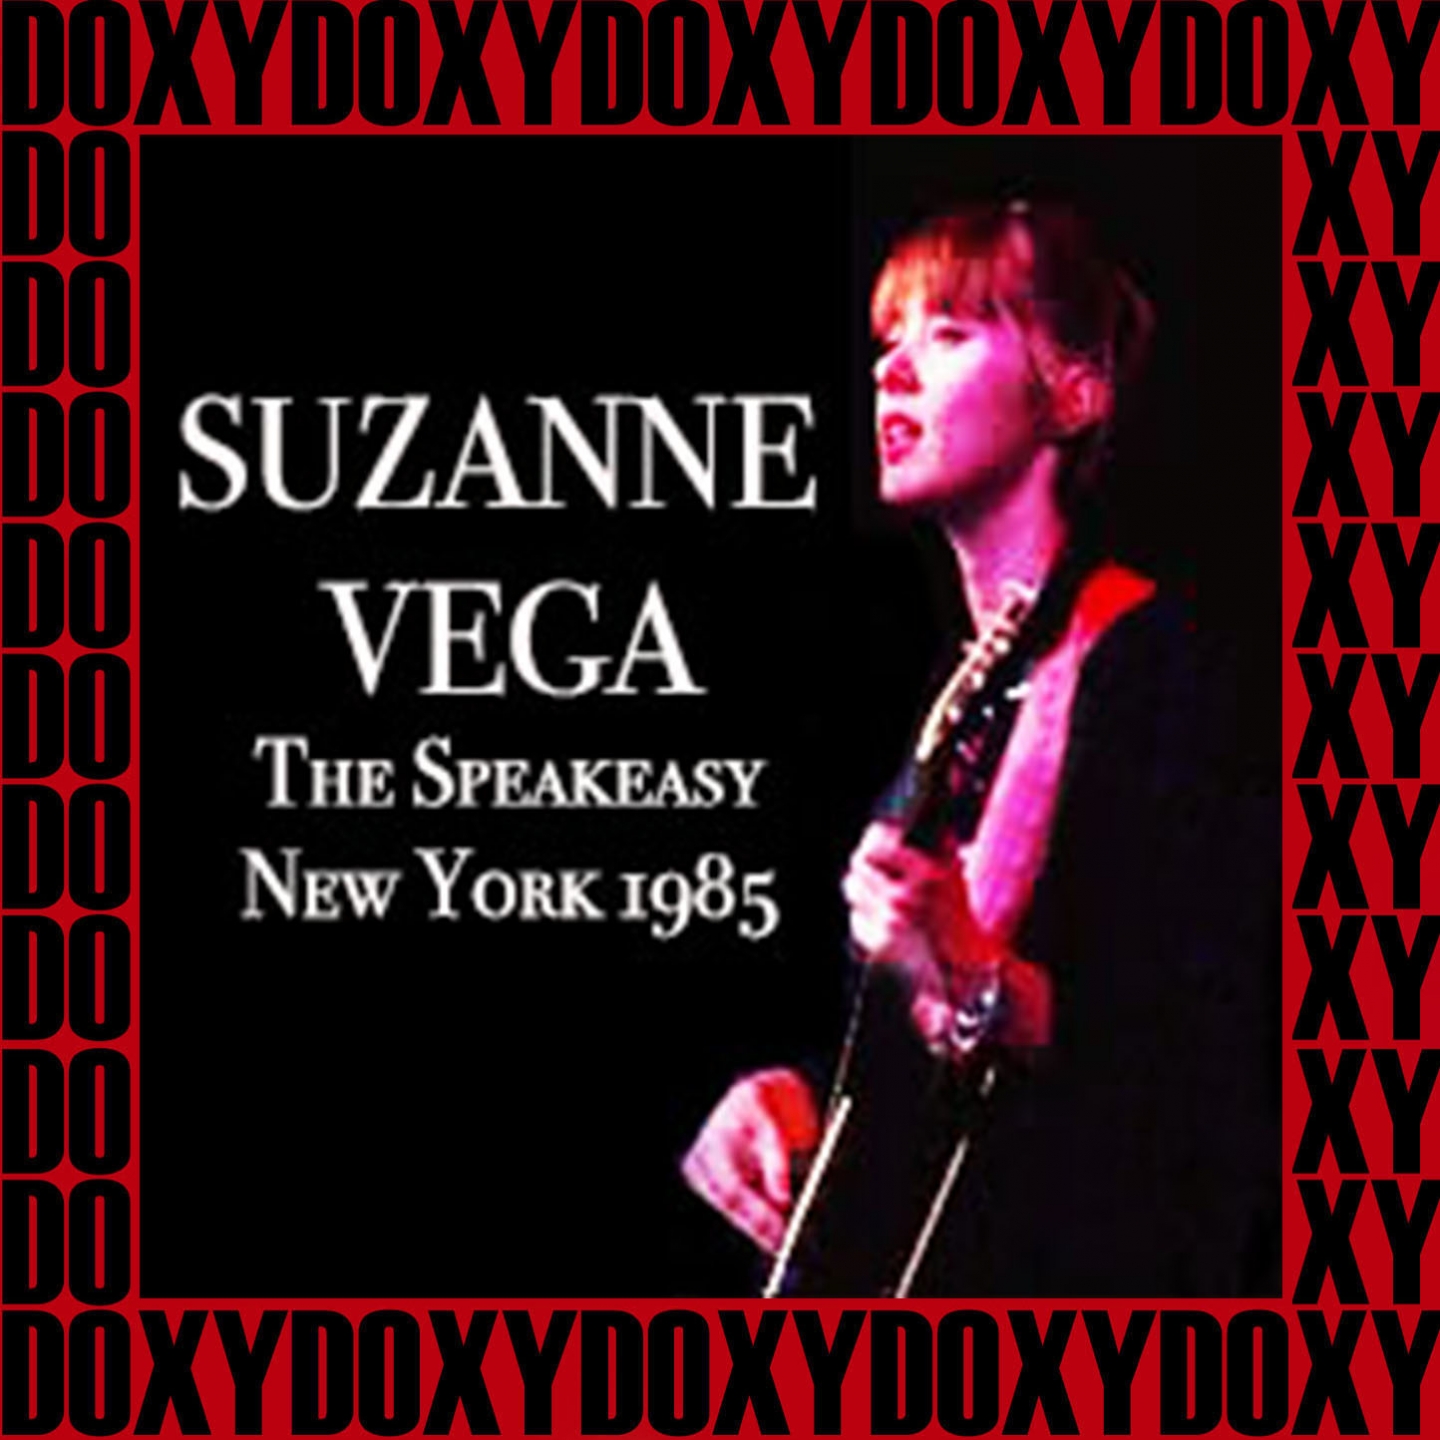 The Speakeasy New York, April 17th, 1985 (Doxy Collection, Remastered, Live on Fm Broadcasting)